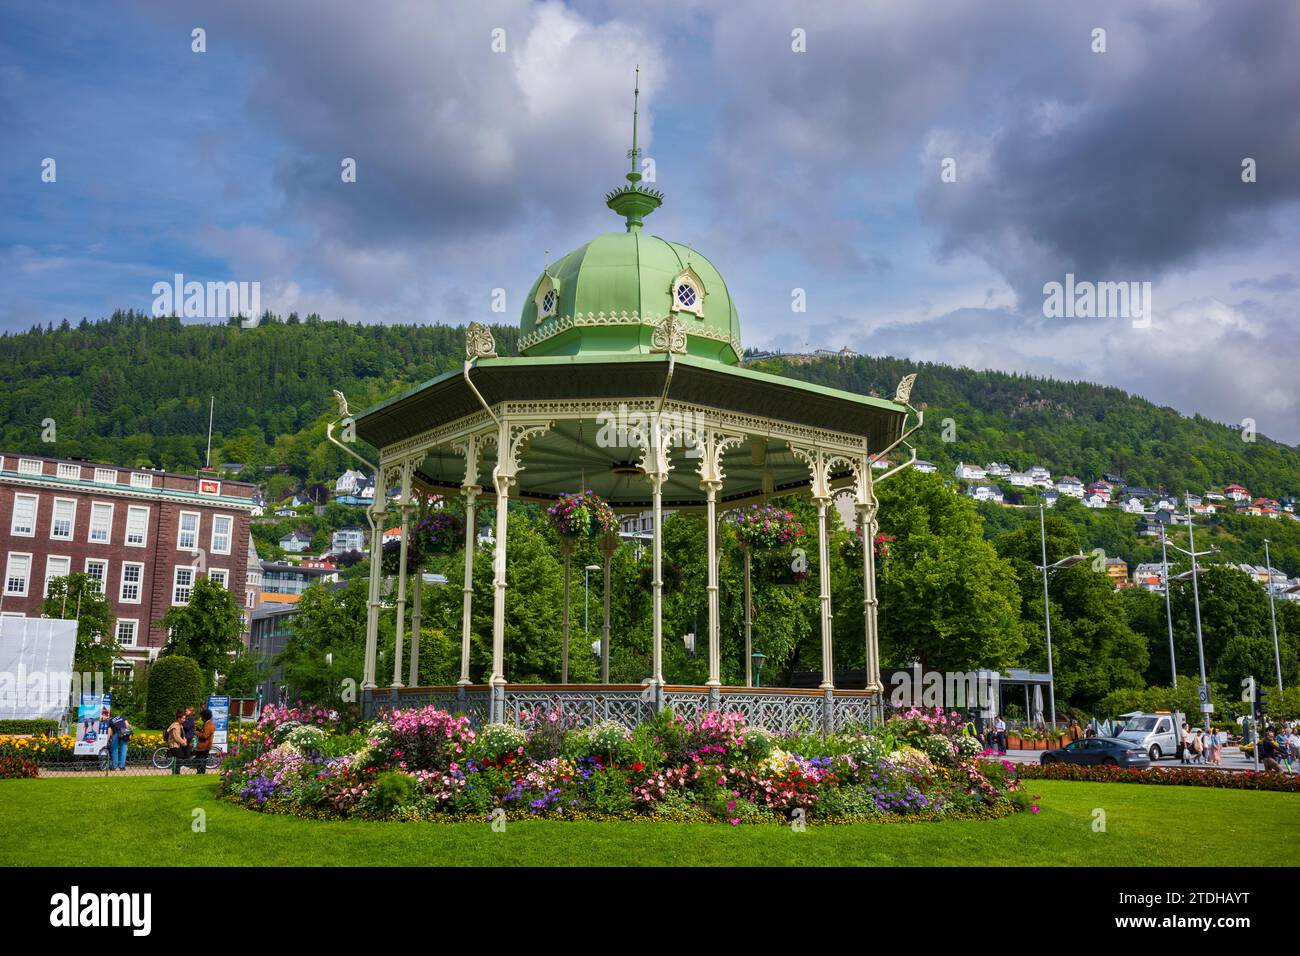 Bergen, Norway, June 29, 2023: Pedestrains walk the city streets of Julemarked Byparken in the center of Bergen during an afternoon. The area is famou Stock Photo